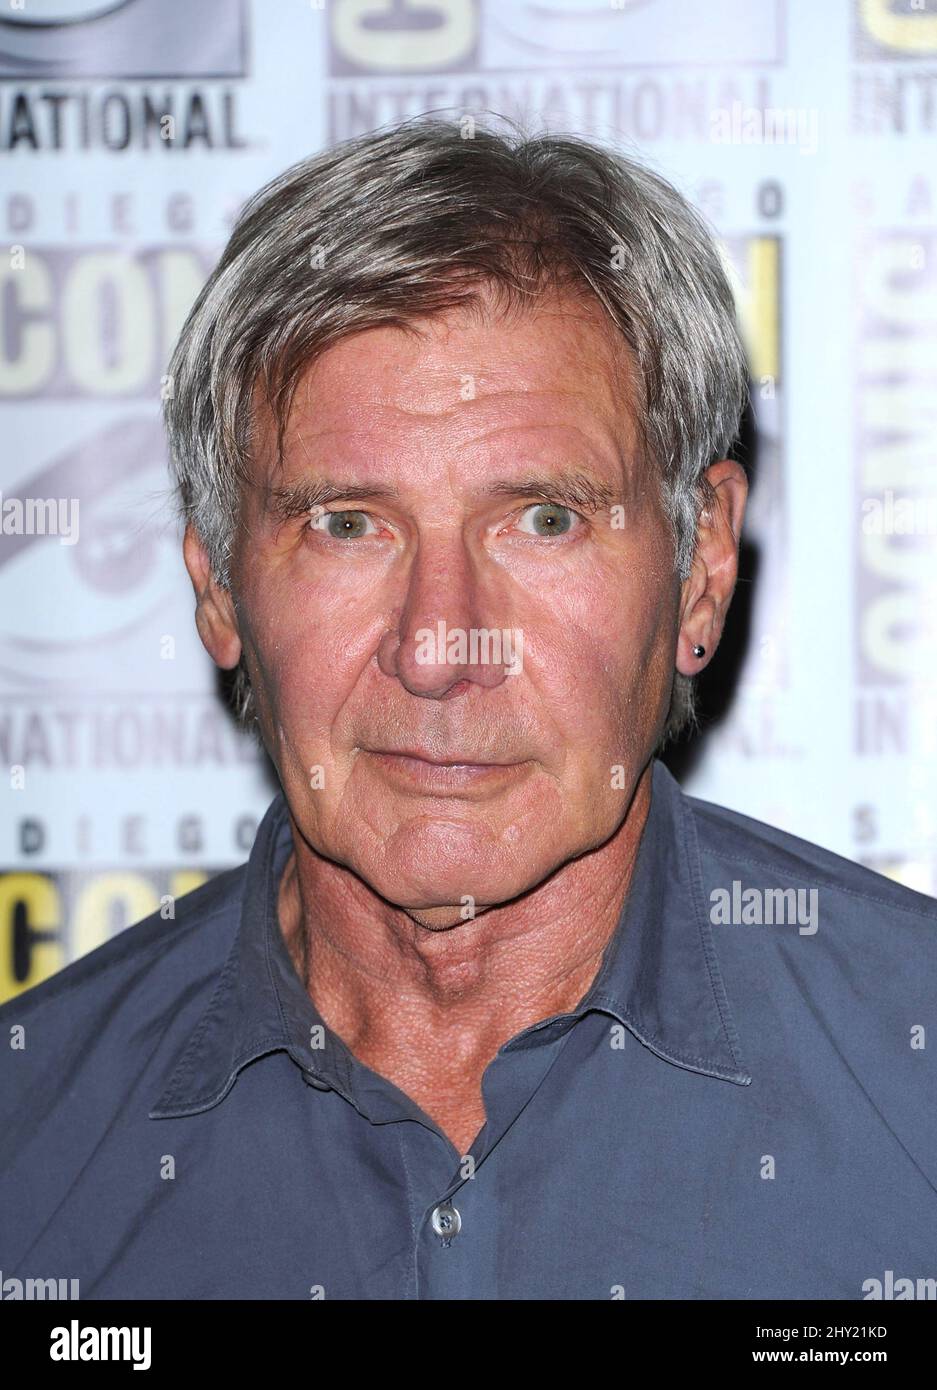 Harrison Ford during ComicCon 2013 held at the San Diego Convention